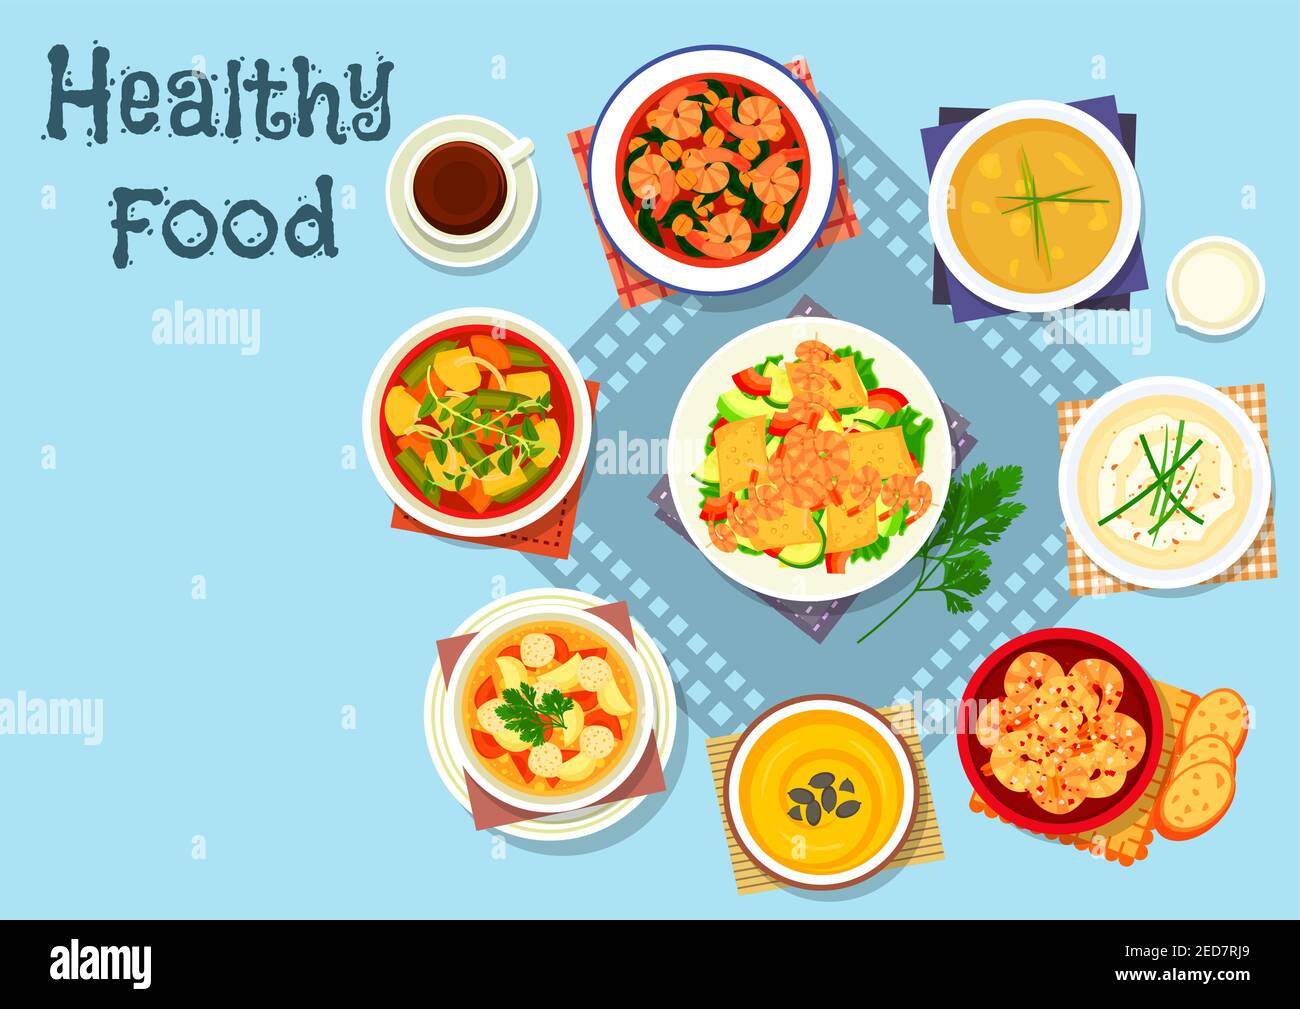 Rich soup and seafood dishes icon of vegetable mango salad with grilled shrimp, soups with carrot, bean, meatball, potato, cauliflower and cream, shri Stock Vector